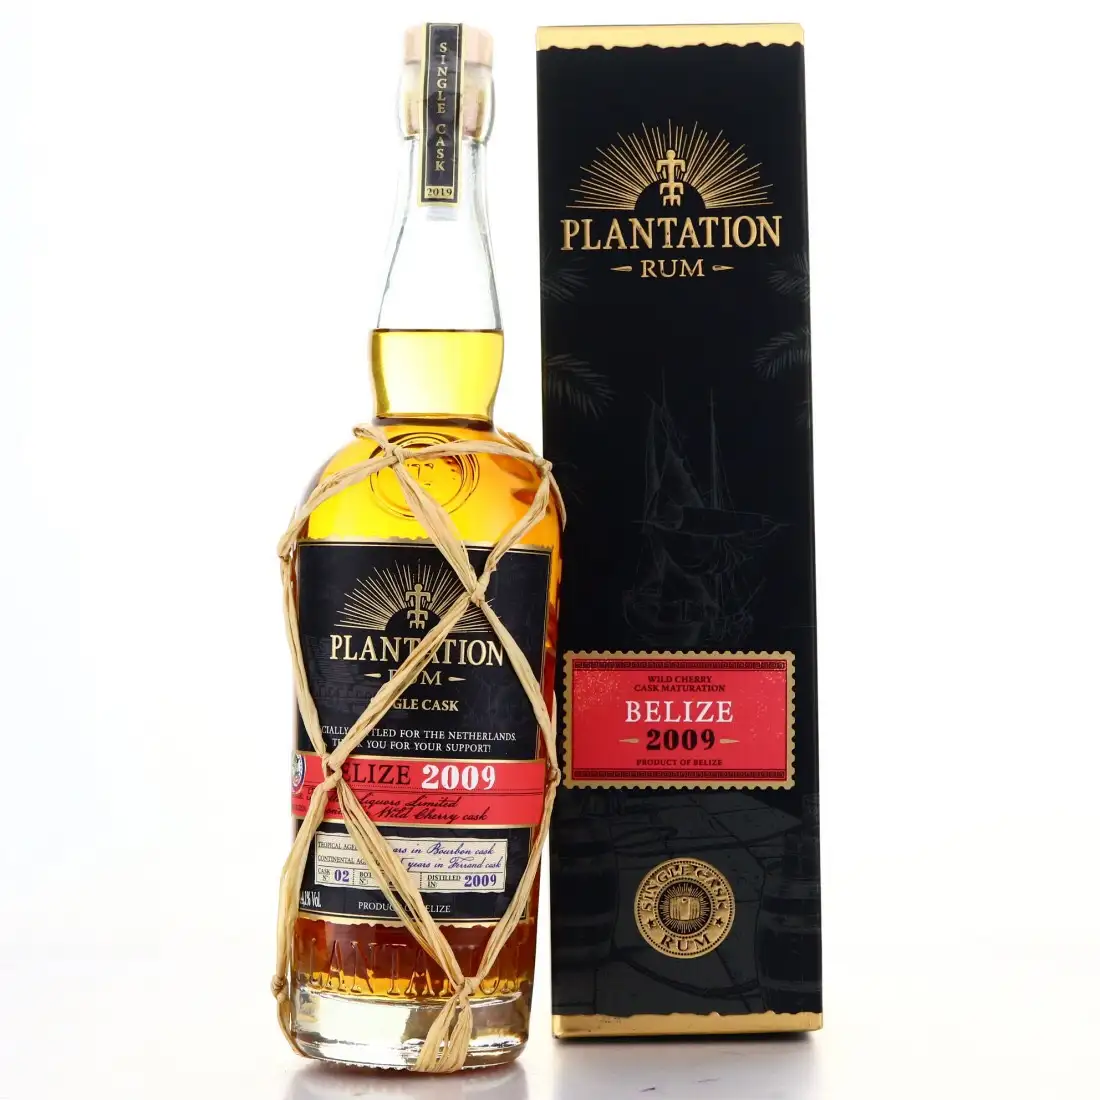 Image of the front of the bottle of the rum Plantation Single Cask (The Netherlands)